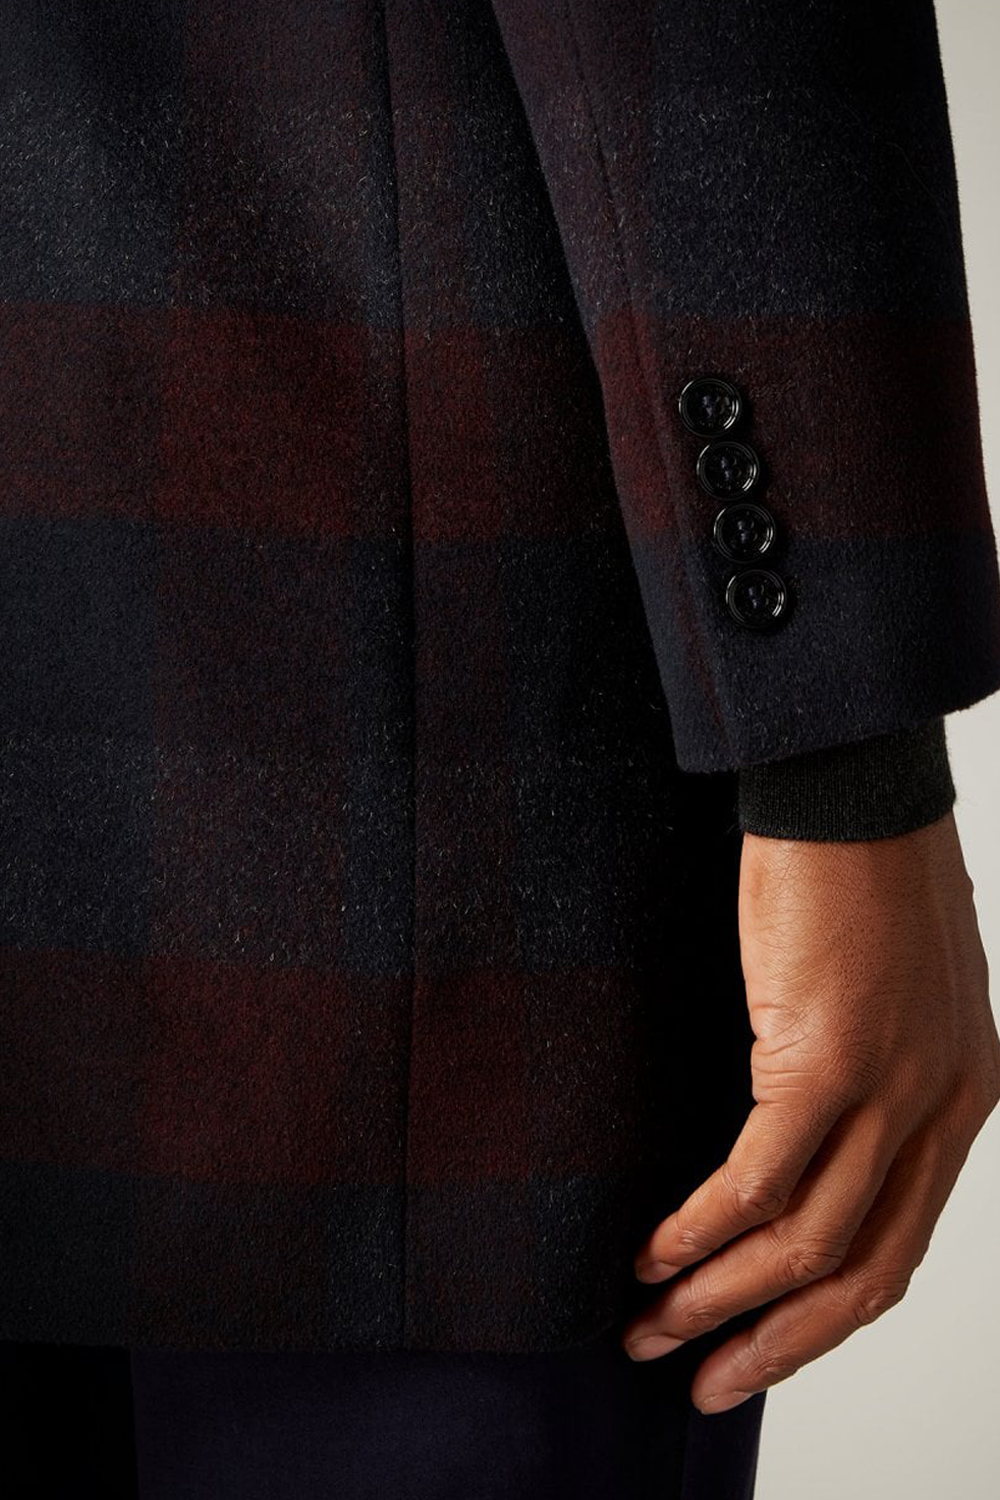 Buy the Remus Uomo Checked Overcoat Burgundy at Intro. Spend £50 for free UK delivery. Official stockists. We ship worldwide.